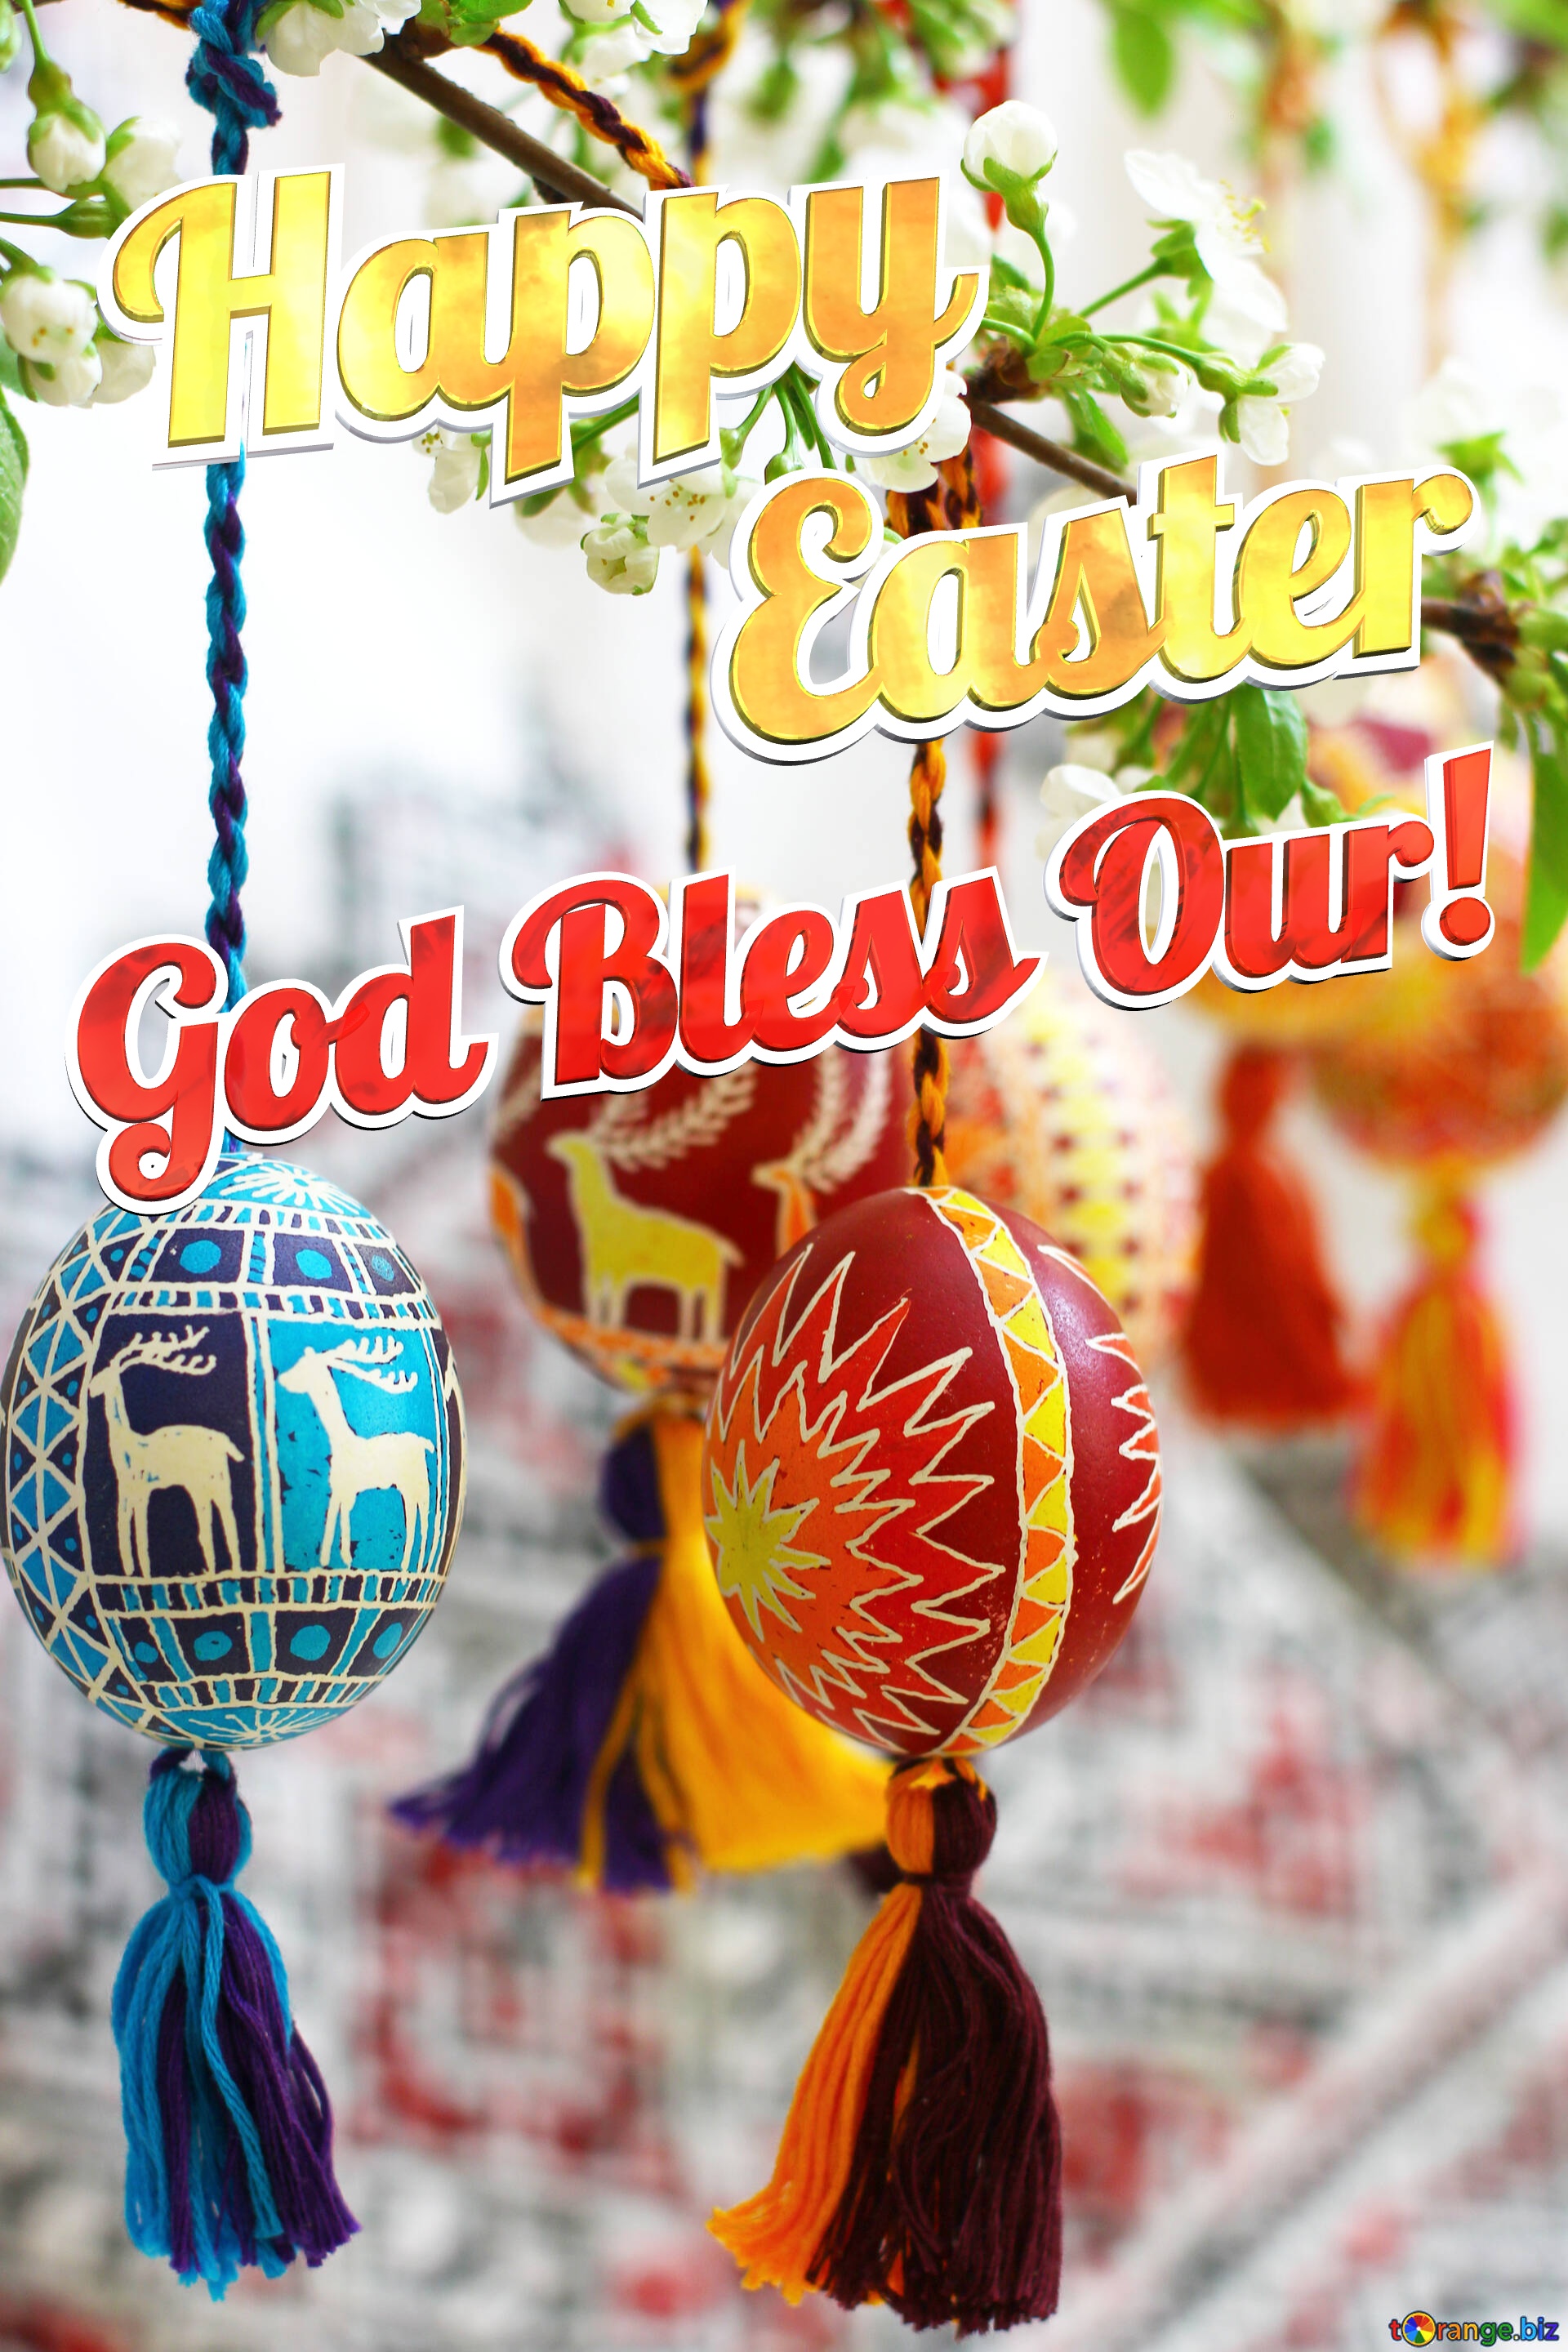 Easter image God Bless Our! Easter eggs hanging on tree №30223